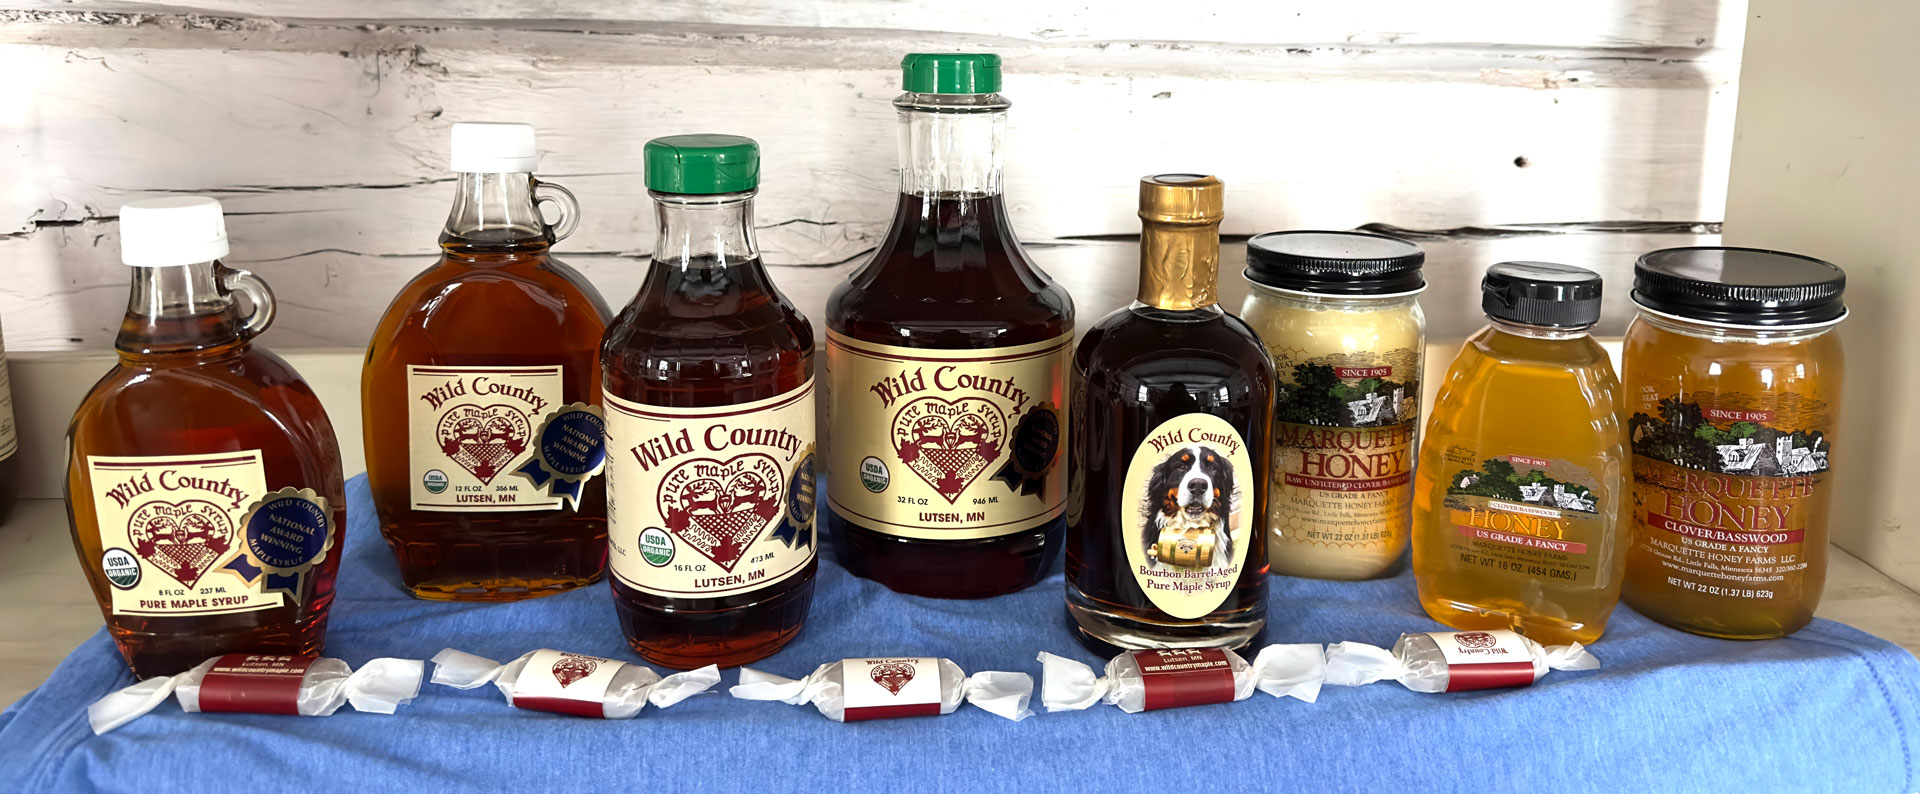 An assortment of Wild Country maple syrup bottles and jars of honey are displayed on a blue cloth. The setup includes various syrup bottle shapes and sizes, honey jars, and wrapped candies, all arranged in front of a rustic white wooden background.